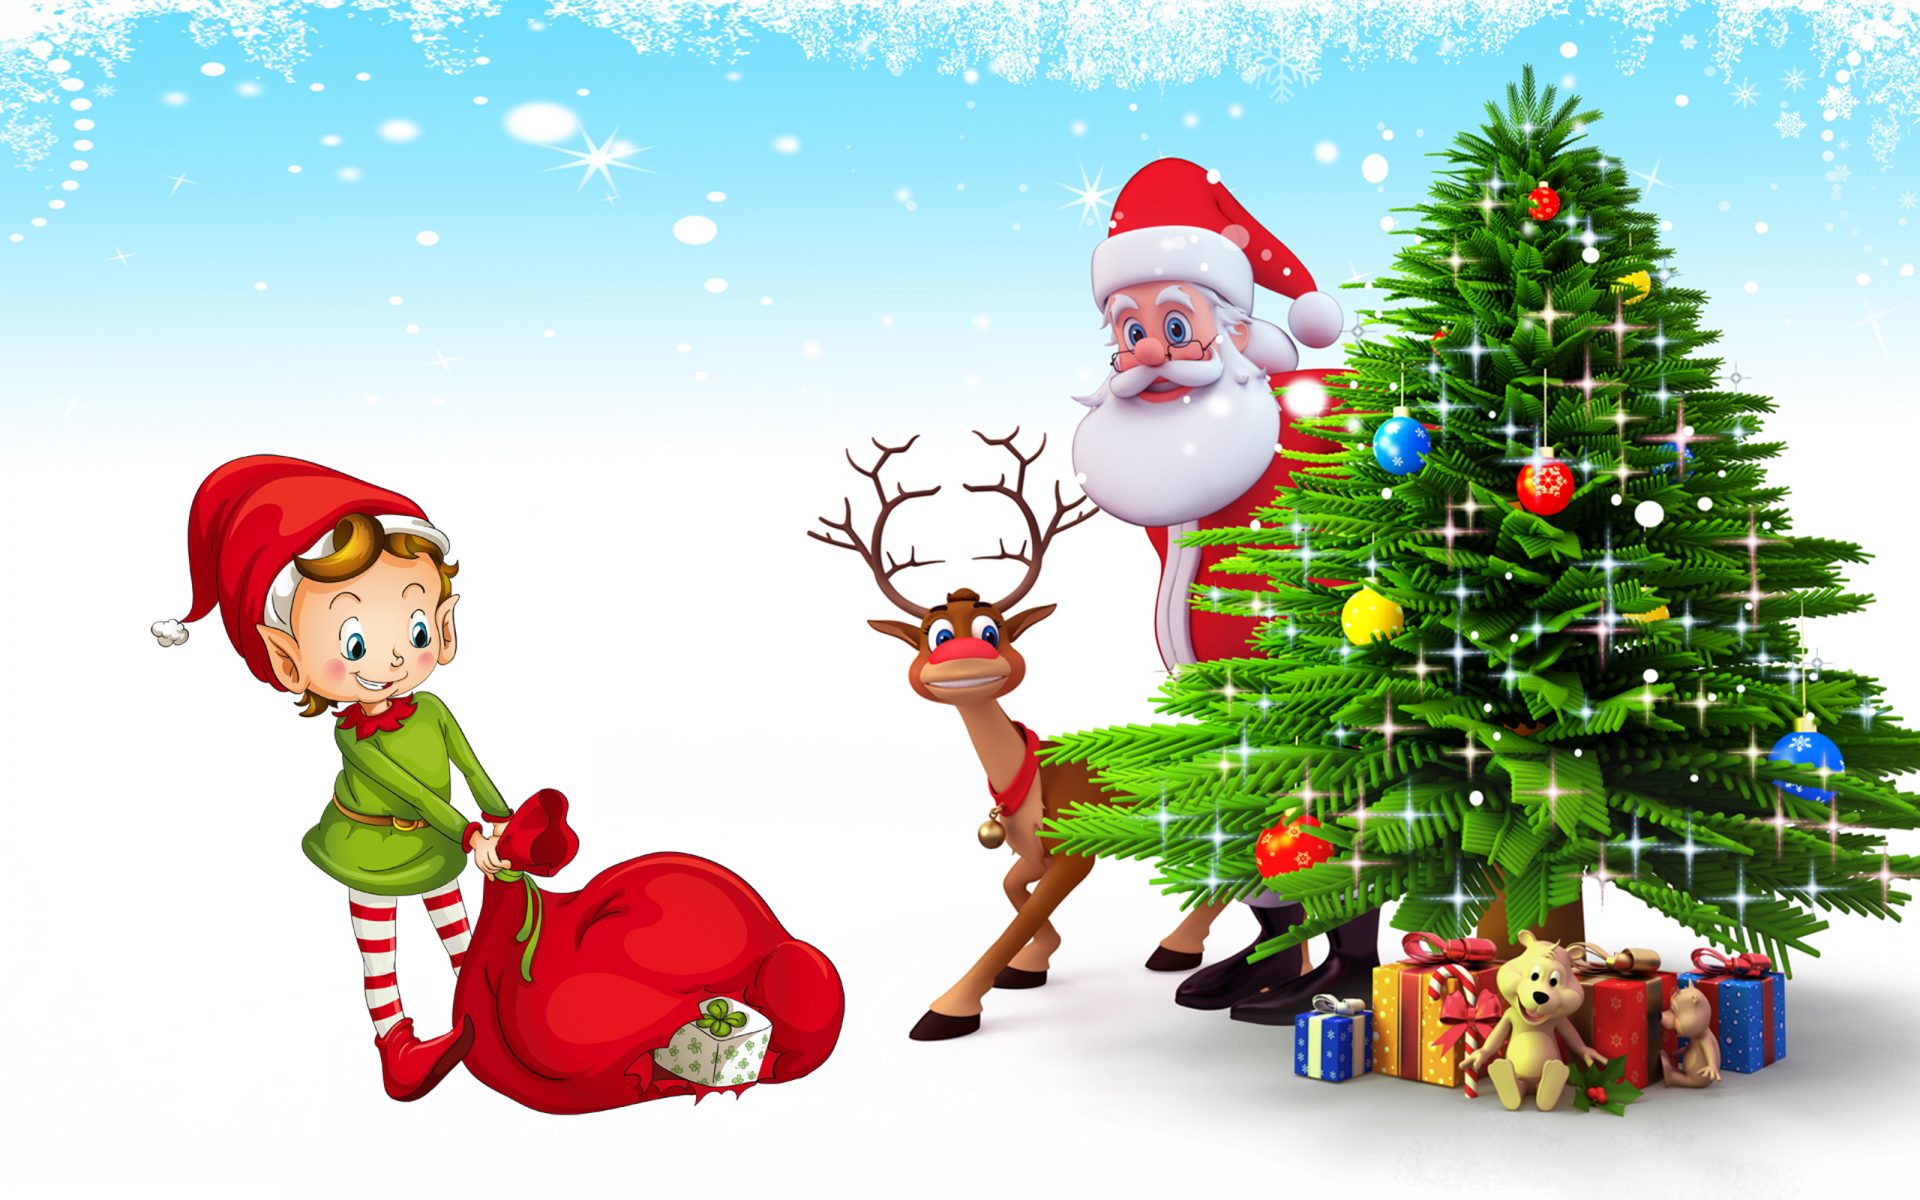 Santa Claus ppt desktop wallpaper, Christmas tree with gifts